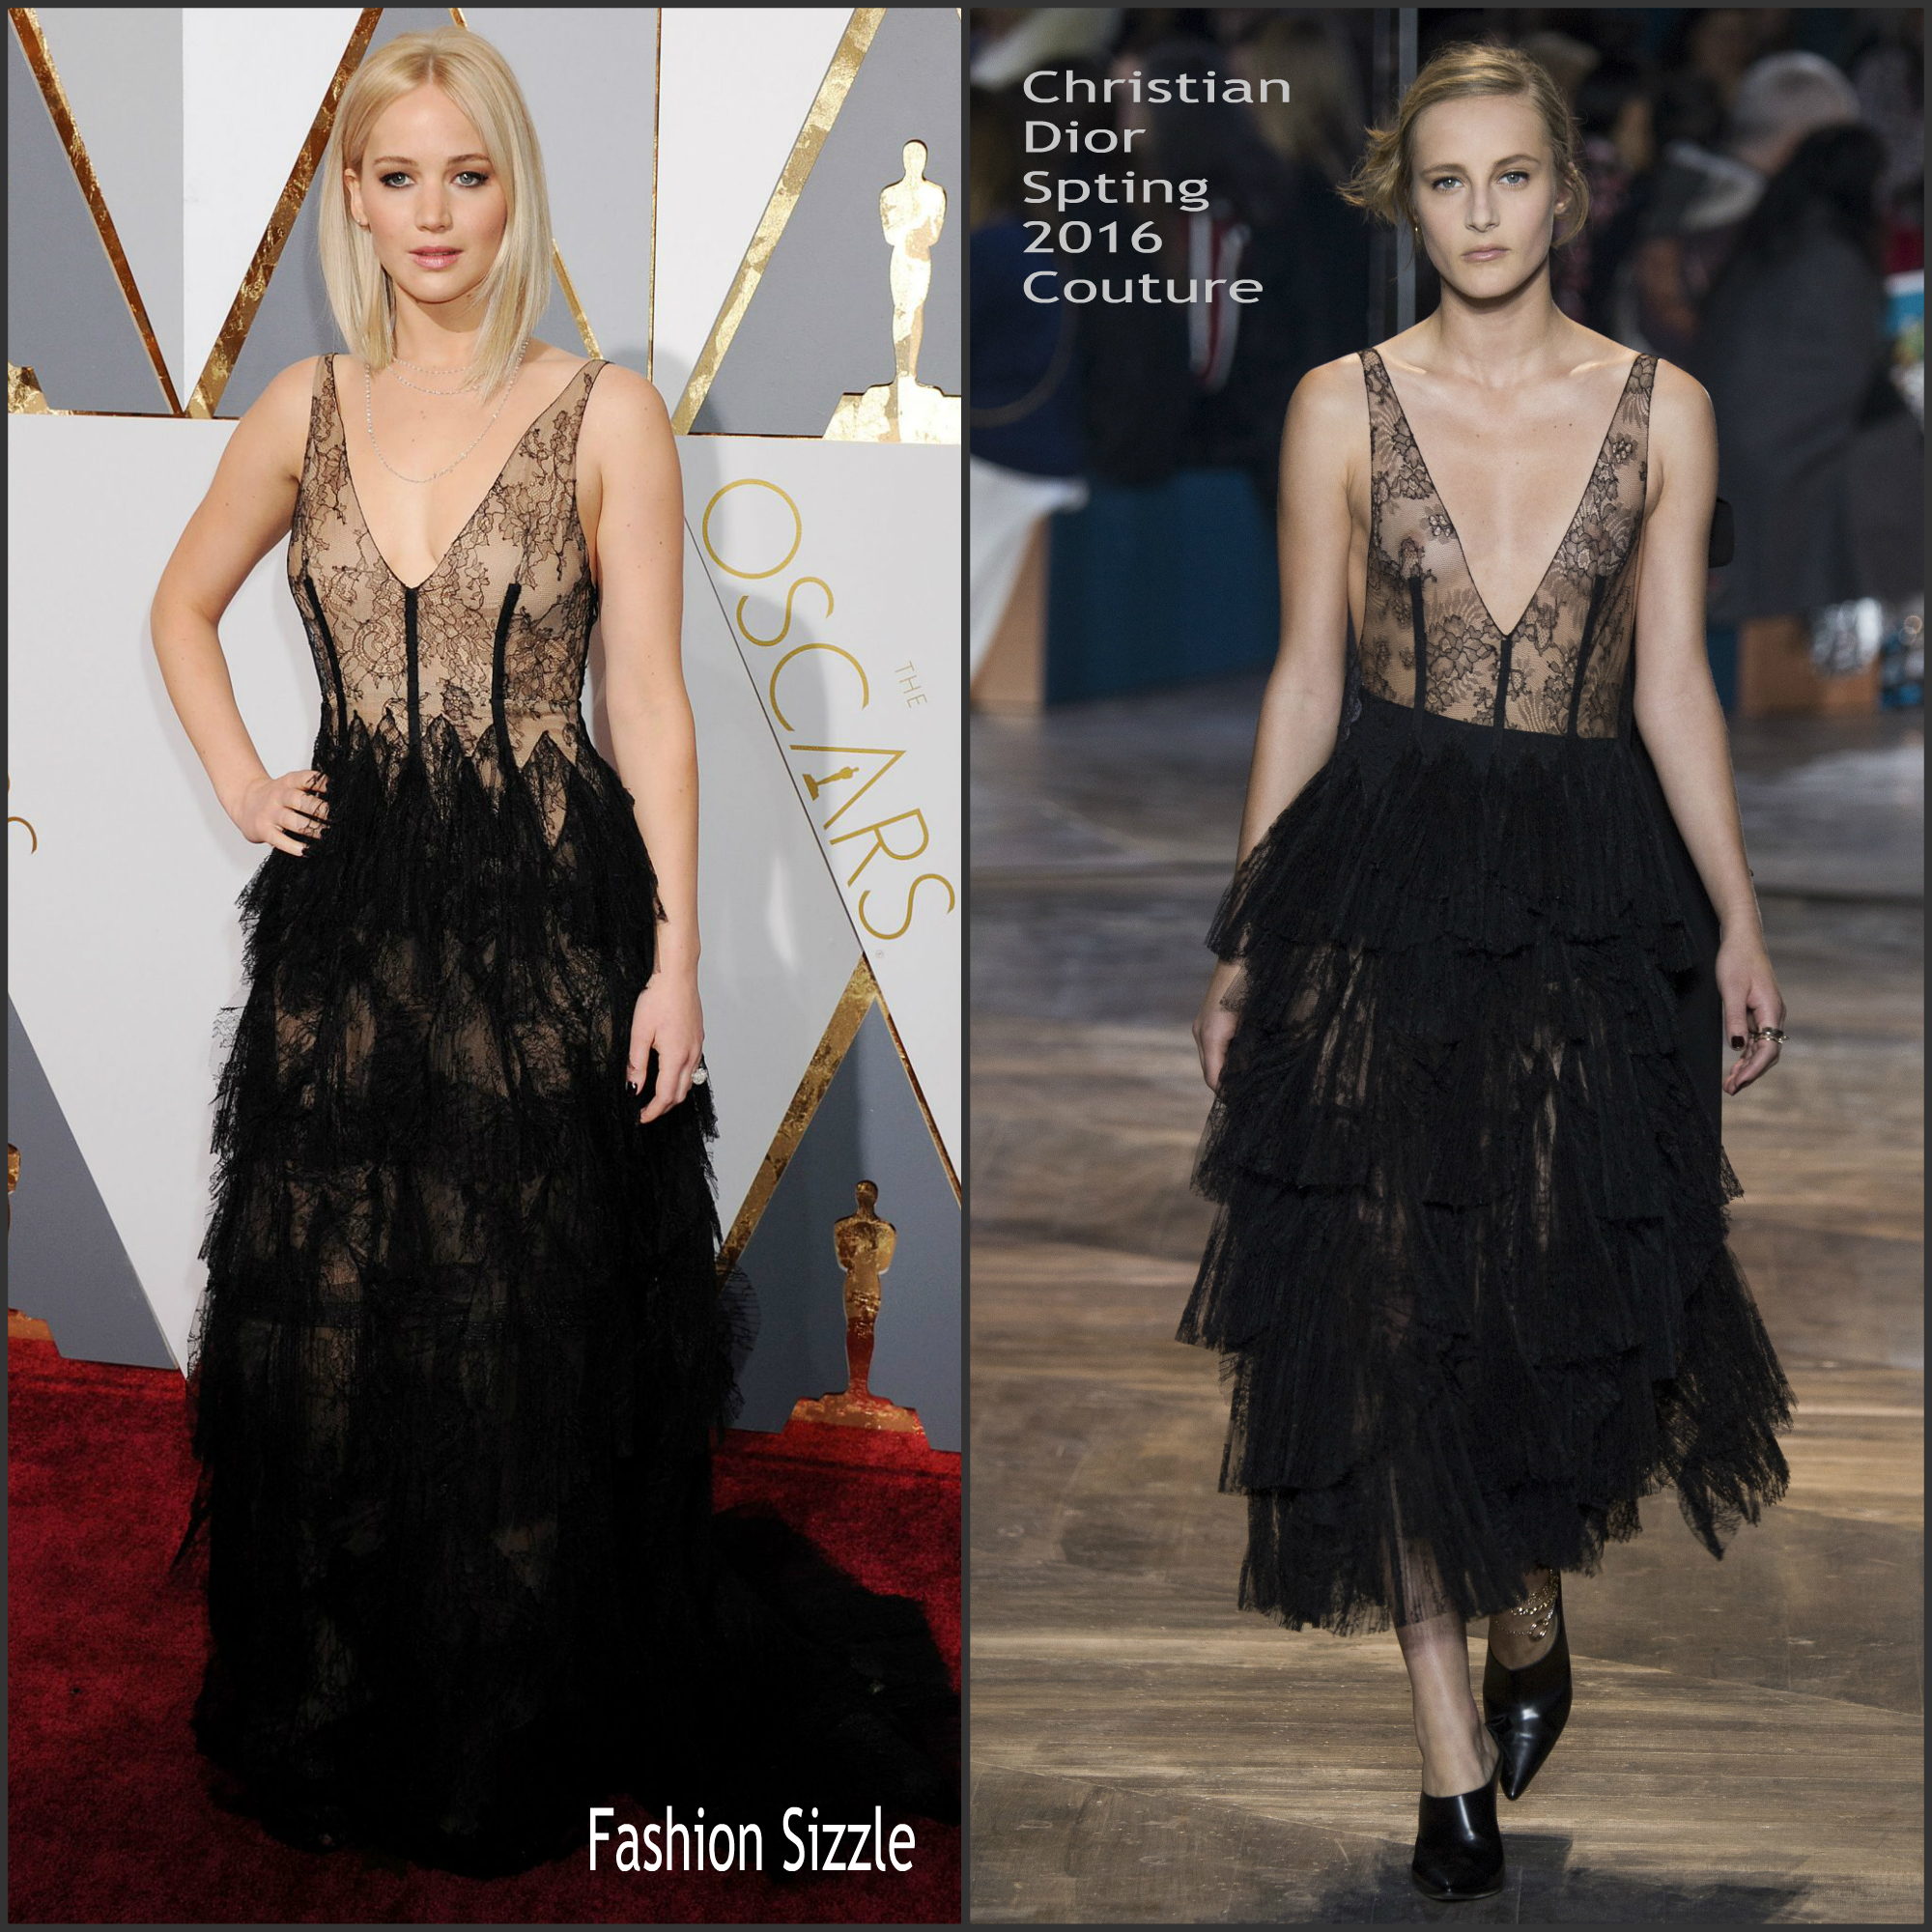 jennifer-lawerence-in-christian-dior-couture-oscars-2016